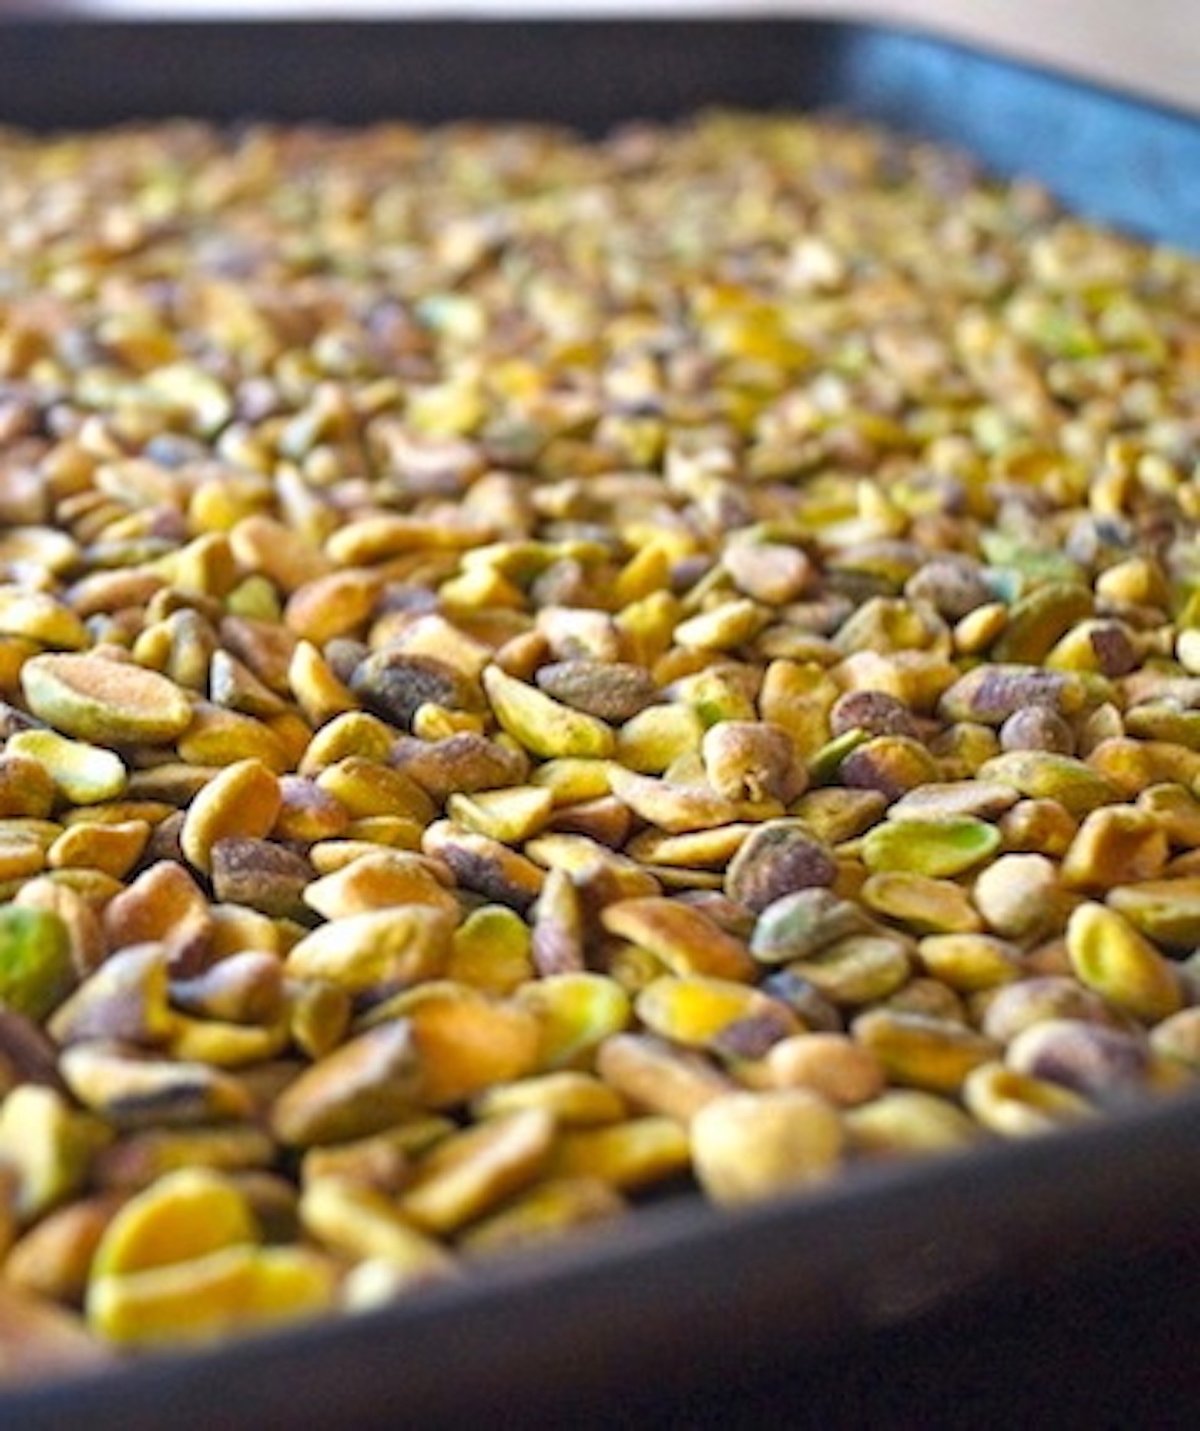 Roasted pistachios on a baking sheet.